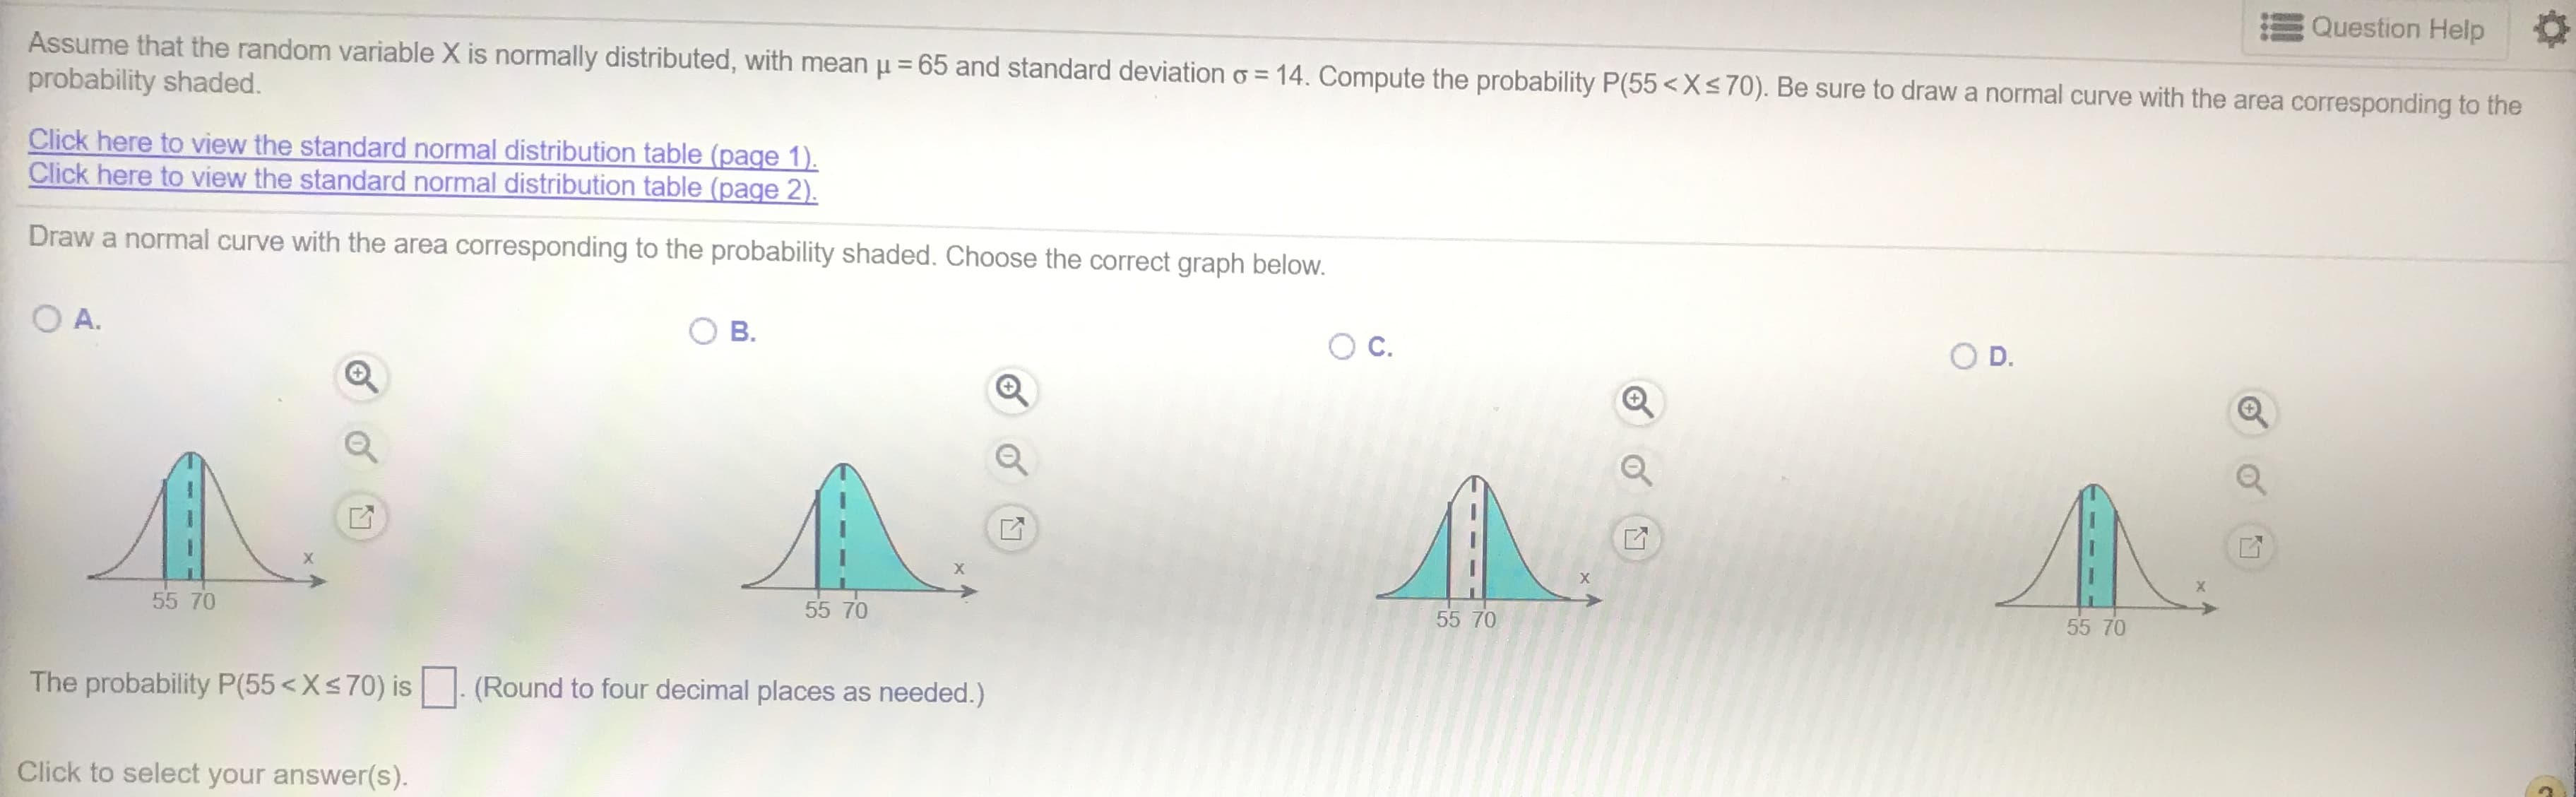 Question Help
Assume that the random variable X is normally distributed, with mean u 65 and standard deviation o 14. Compute the probability P(55< Xs70). Be sure to draw a normal curve with the area corresponding to the
probability shaded.
Click here to view the standard normal distribution table (page 1)
Click here to view the standard normal distribution table (page 2).
Draw a normal curve with the area corresponding to the probability shaded. Choose the correct graph below.
O D.
OA.
Ос.
В.
55 70
55 70
55 70
55 70
(Round to four decimal places as needed.)
The probability P(55< Xs70) is
Click to select your answer(s).
